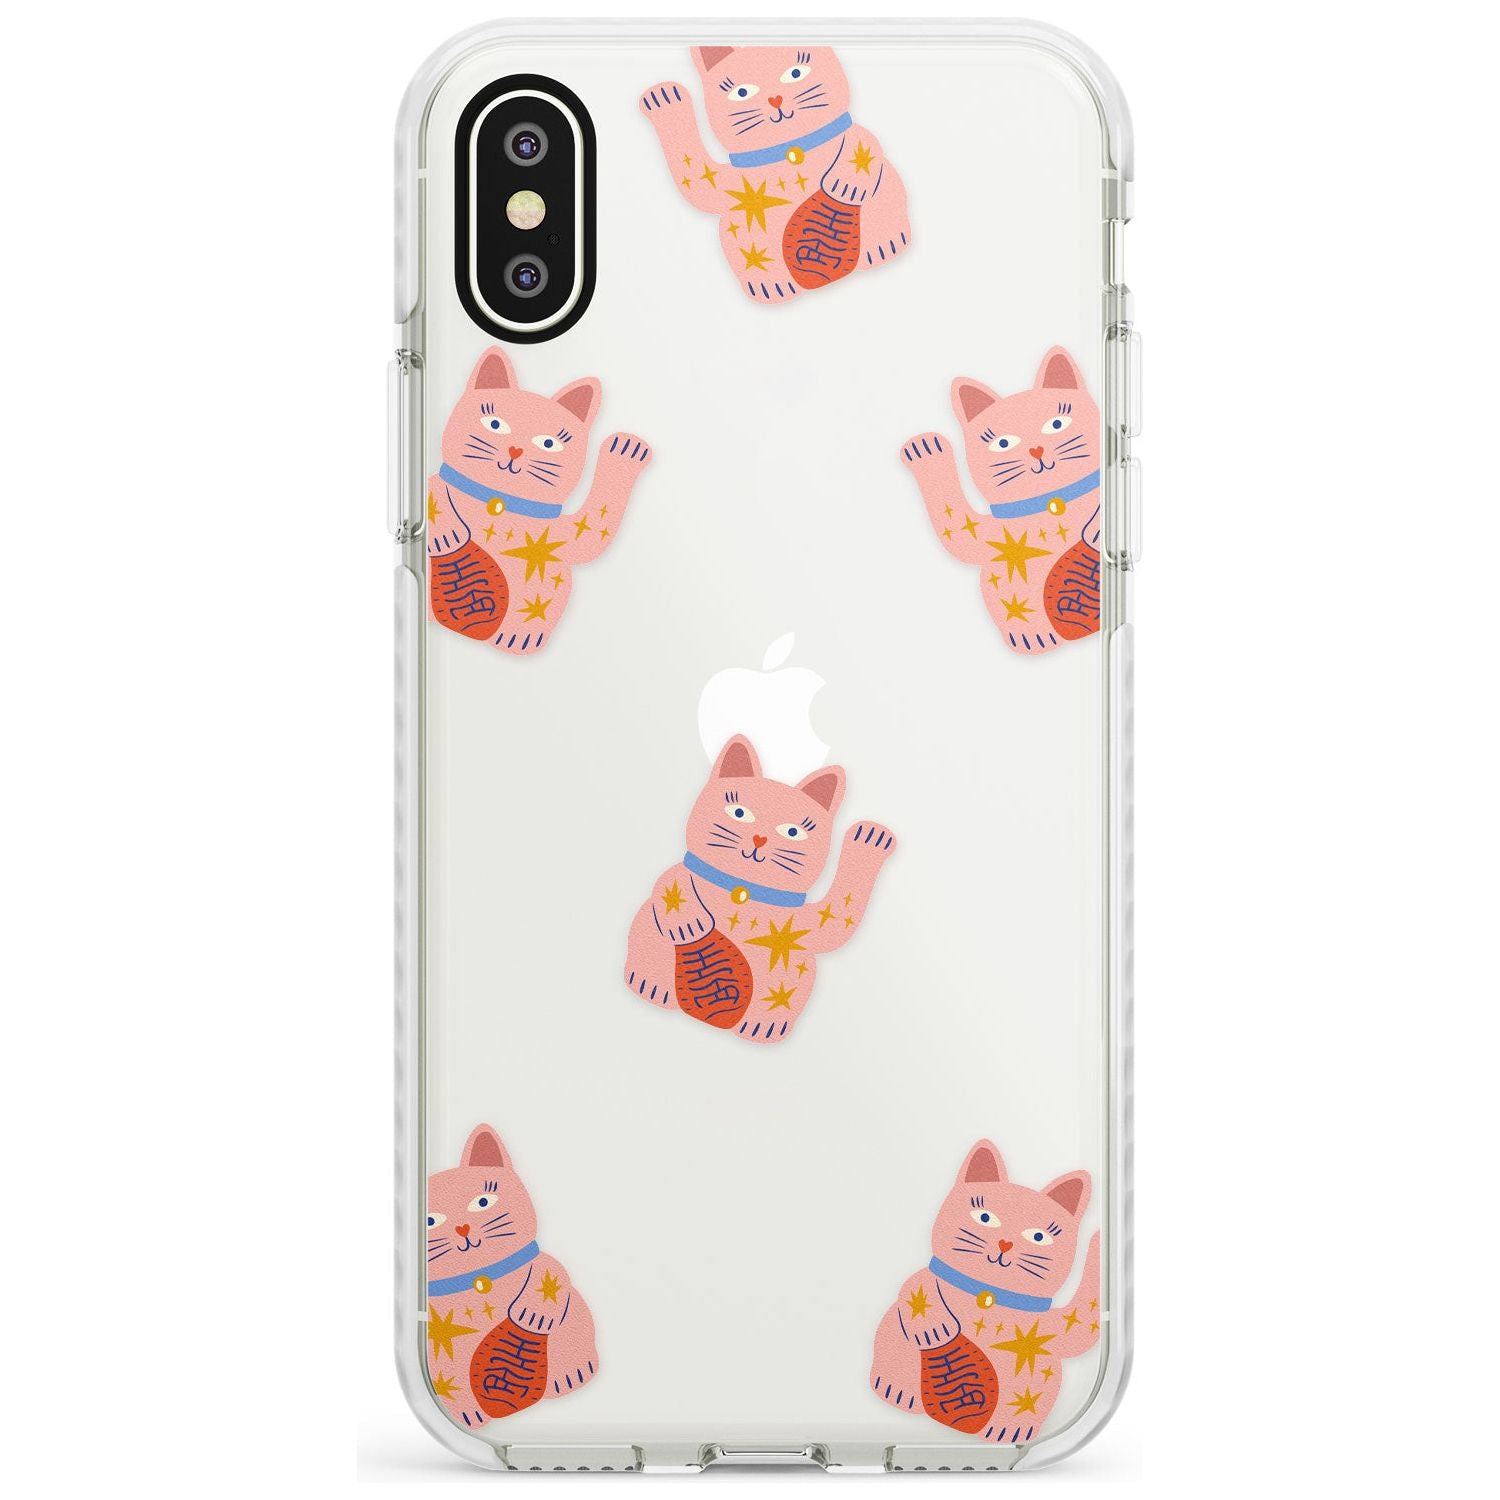 Waving Cat Pattern Impact Phone Case for iPhone X XS Max XR